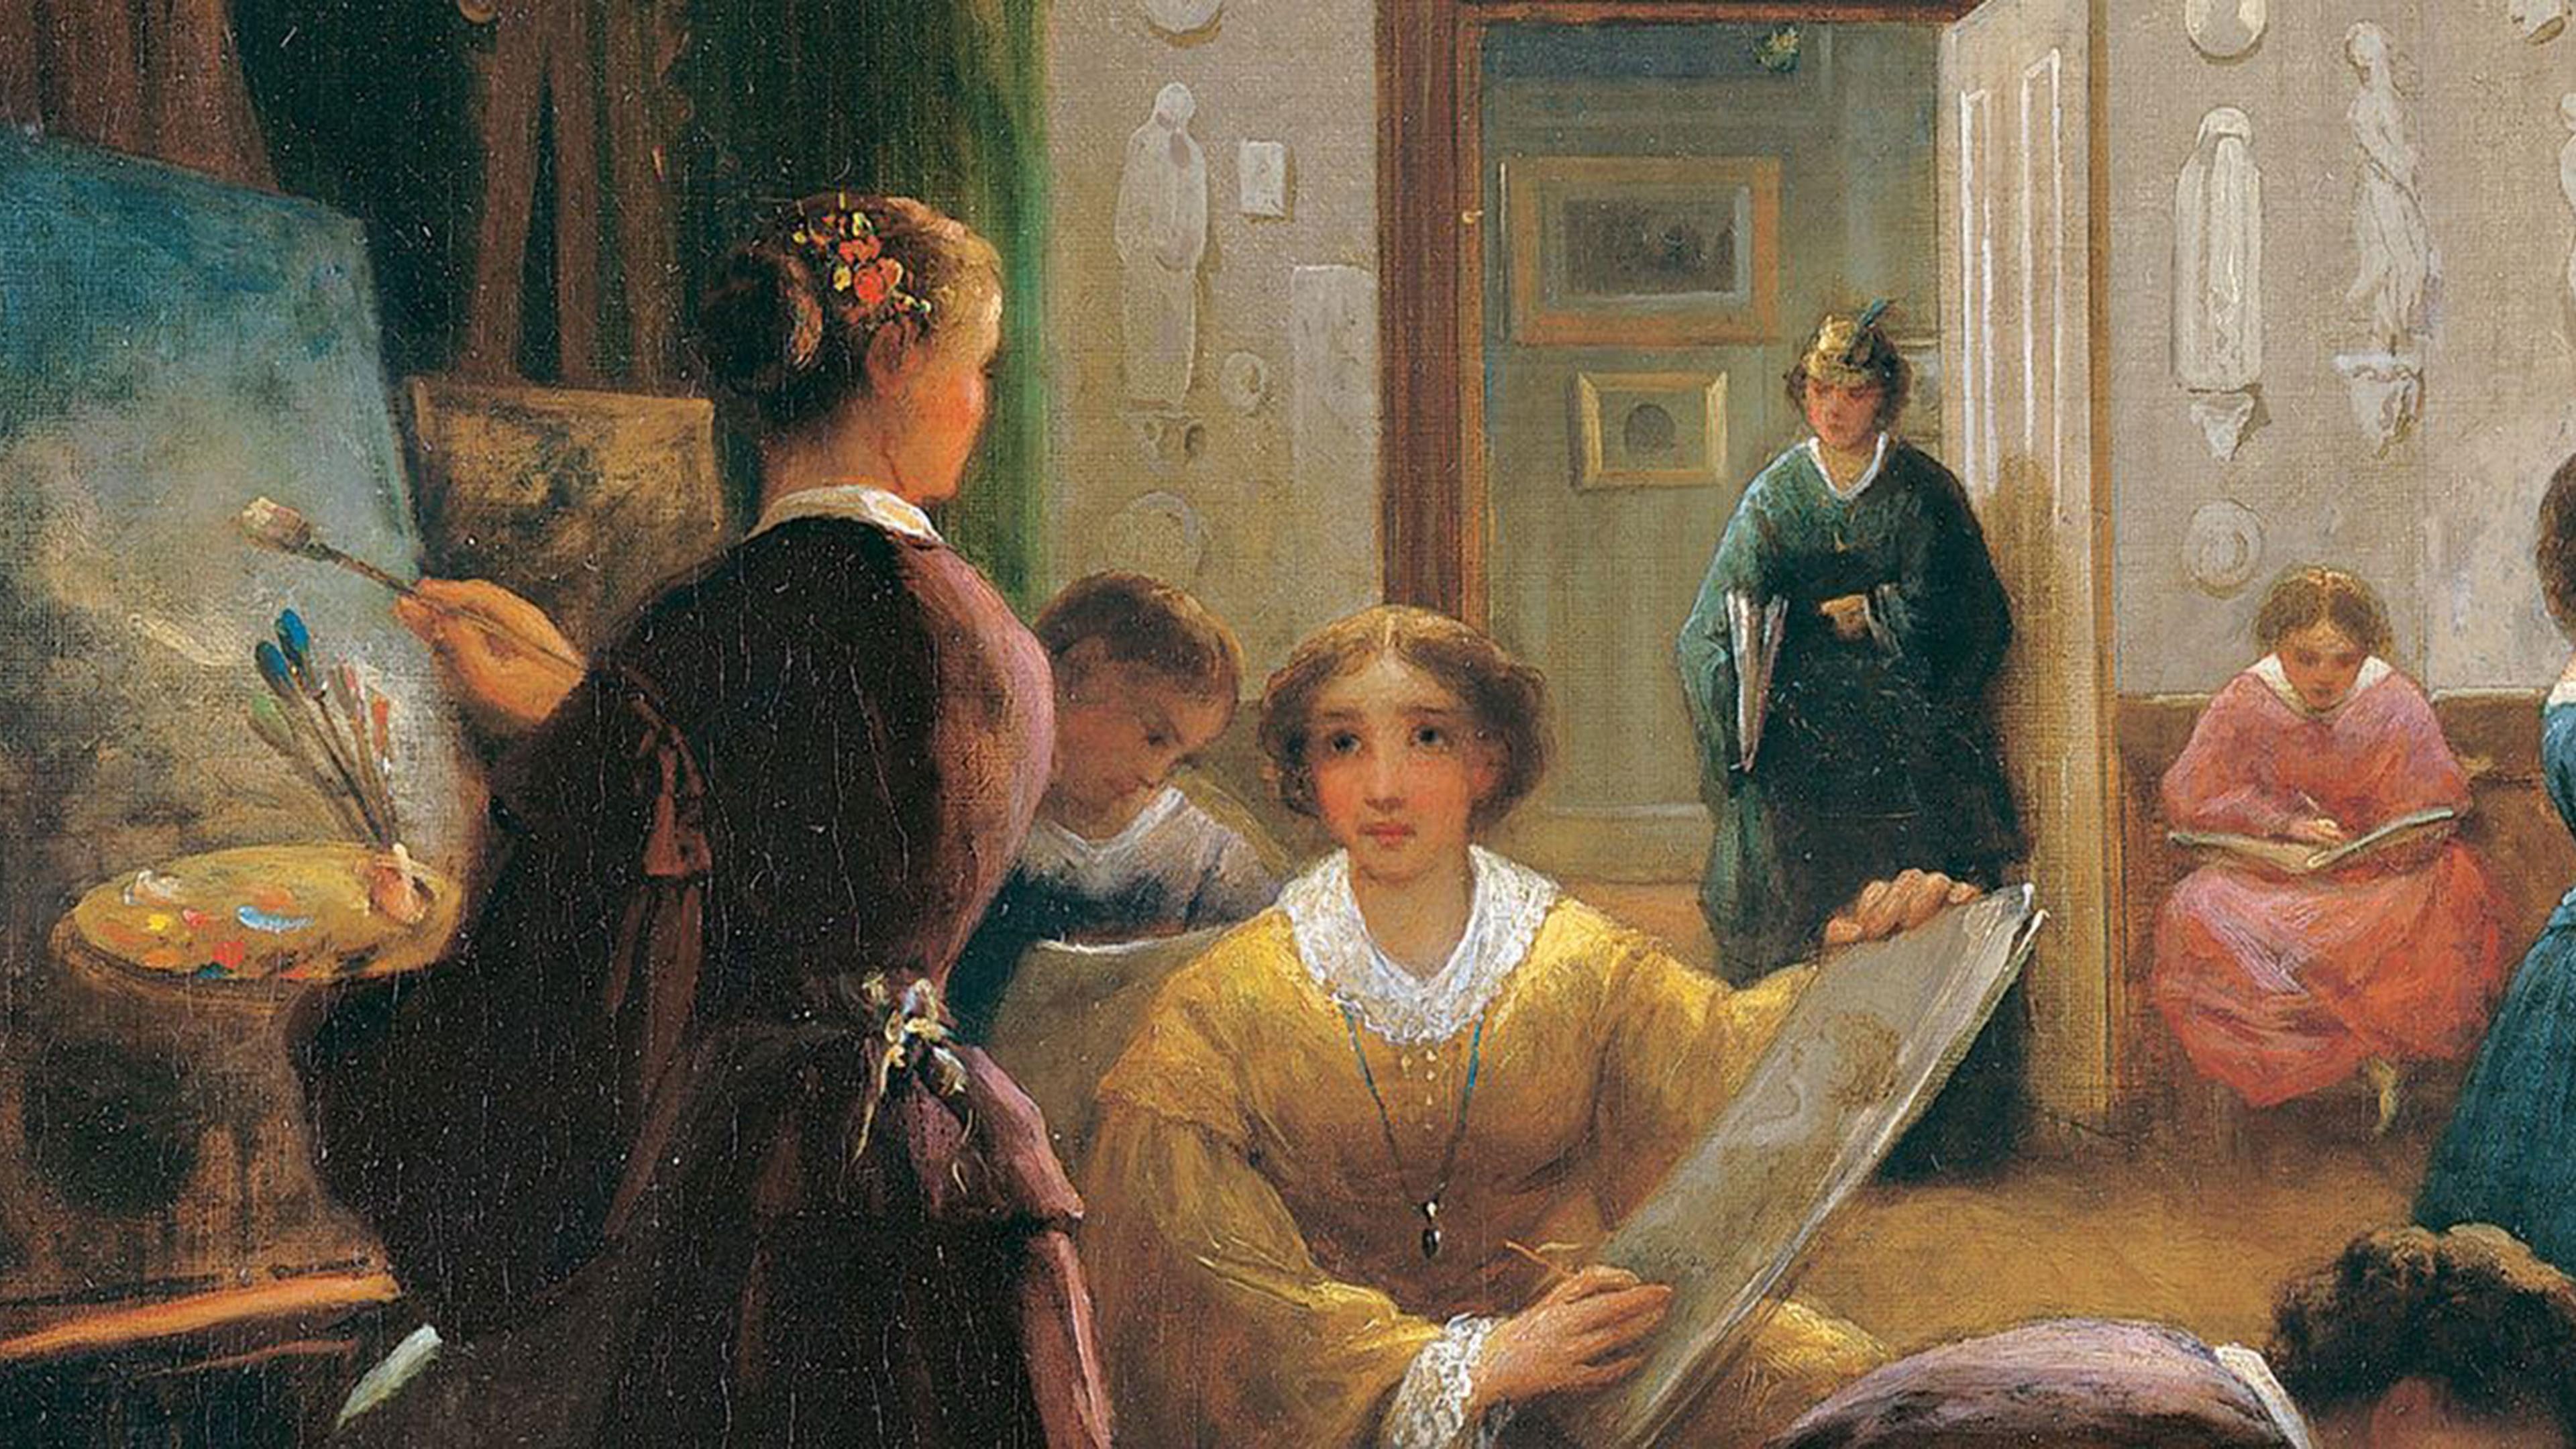 Woman painting while in a room full of women reading